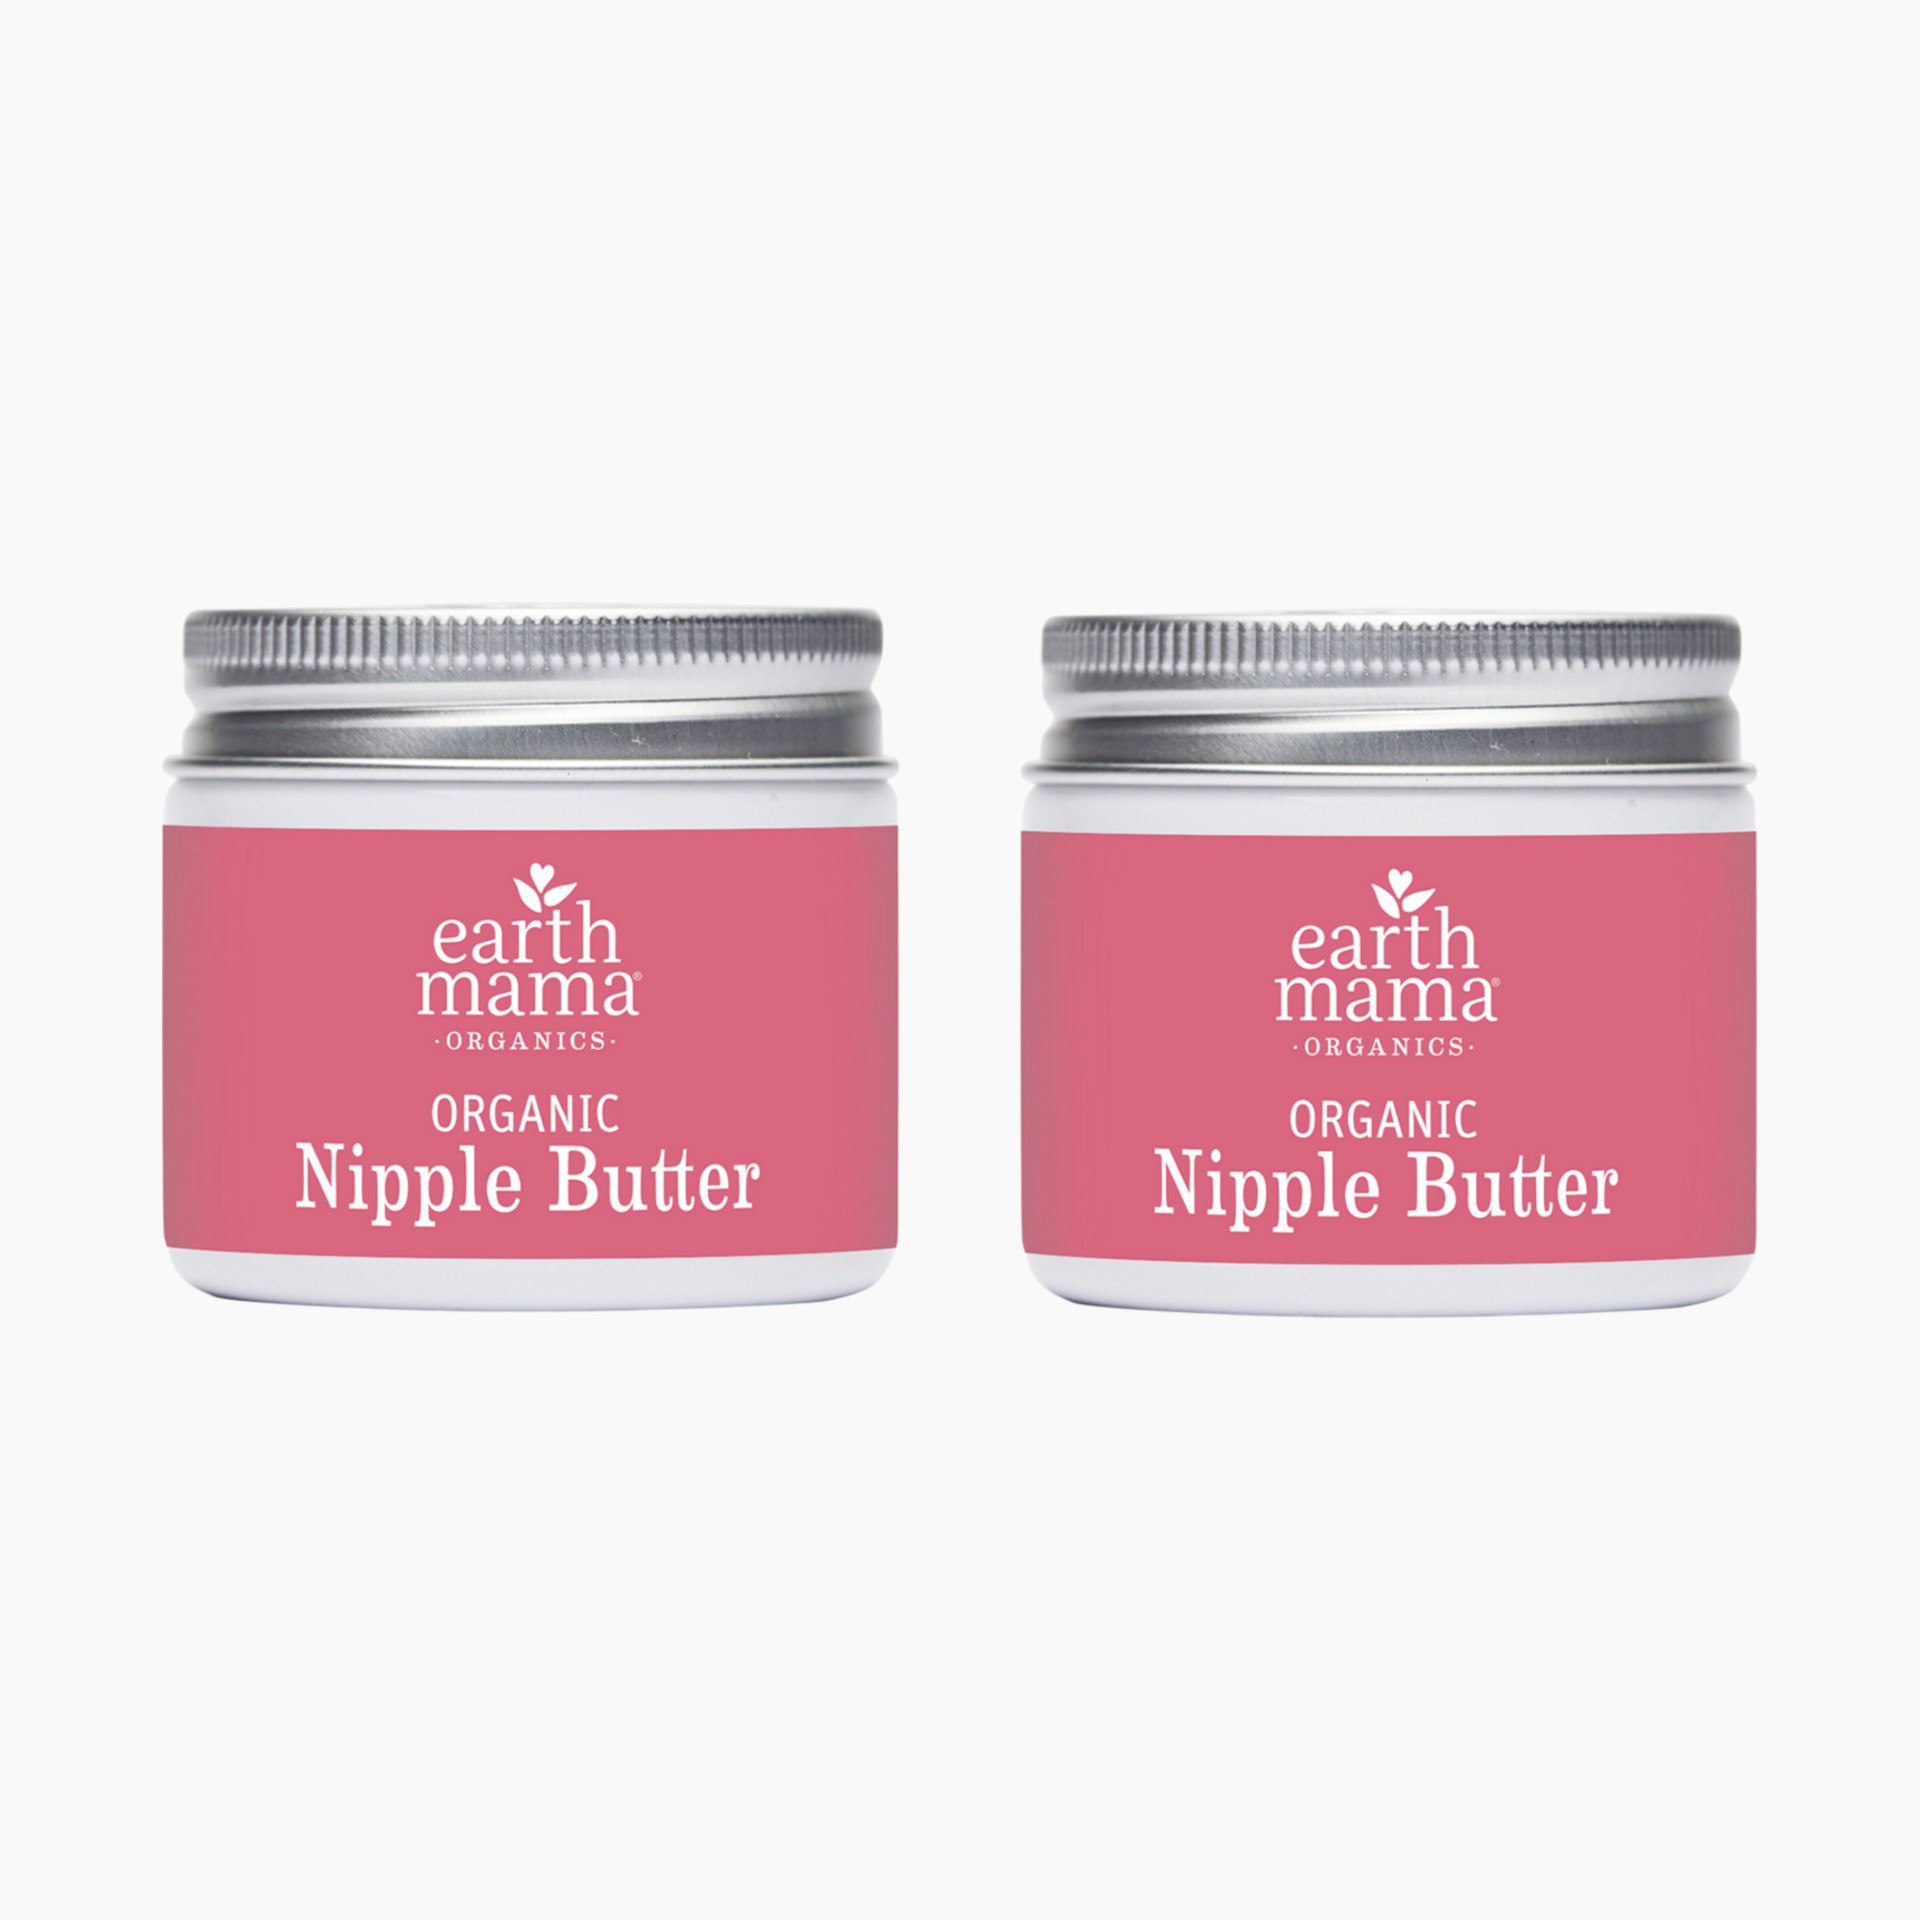 Organic Nipple Butter™ Breastfeeding Cream by Earth Mama  Lanolin-free,  Postpartum Essentials Safe for Nursing, Non-GMO Project Verified, 2-Fluid  Ounce : Breast Nipple Therapy Products : Baby 